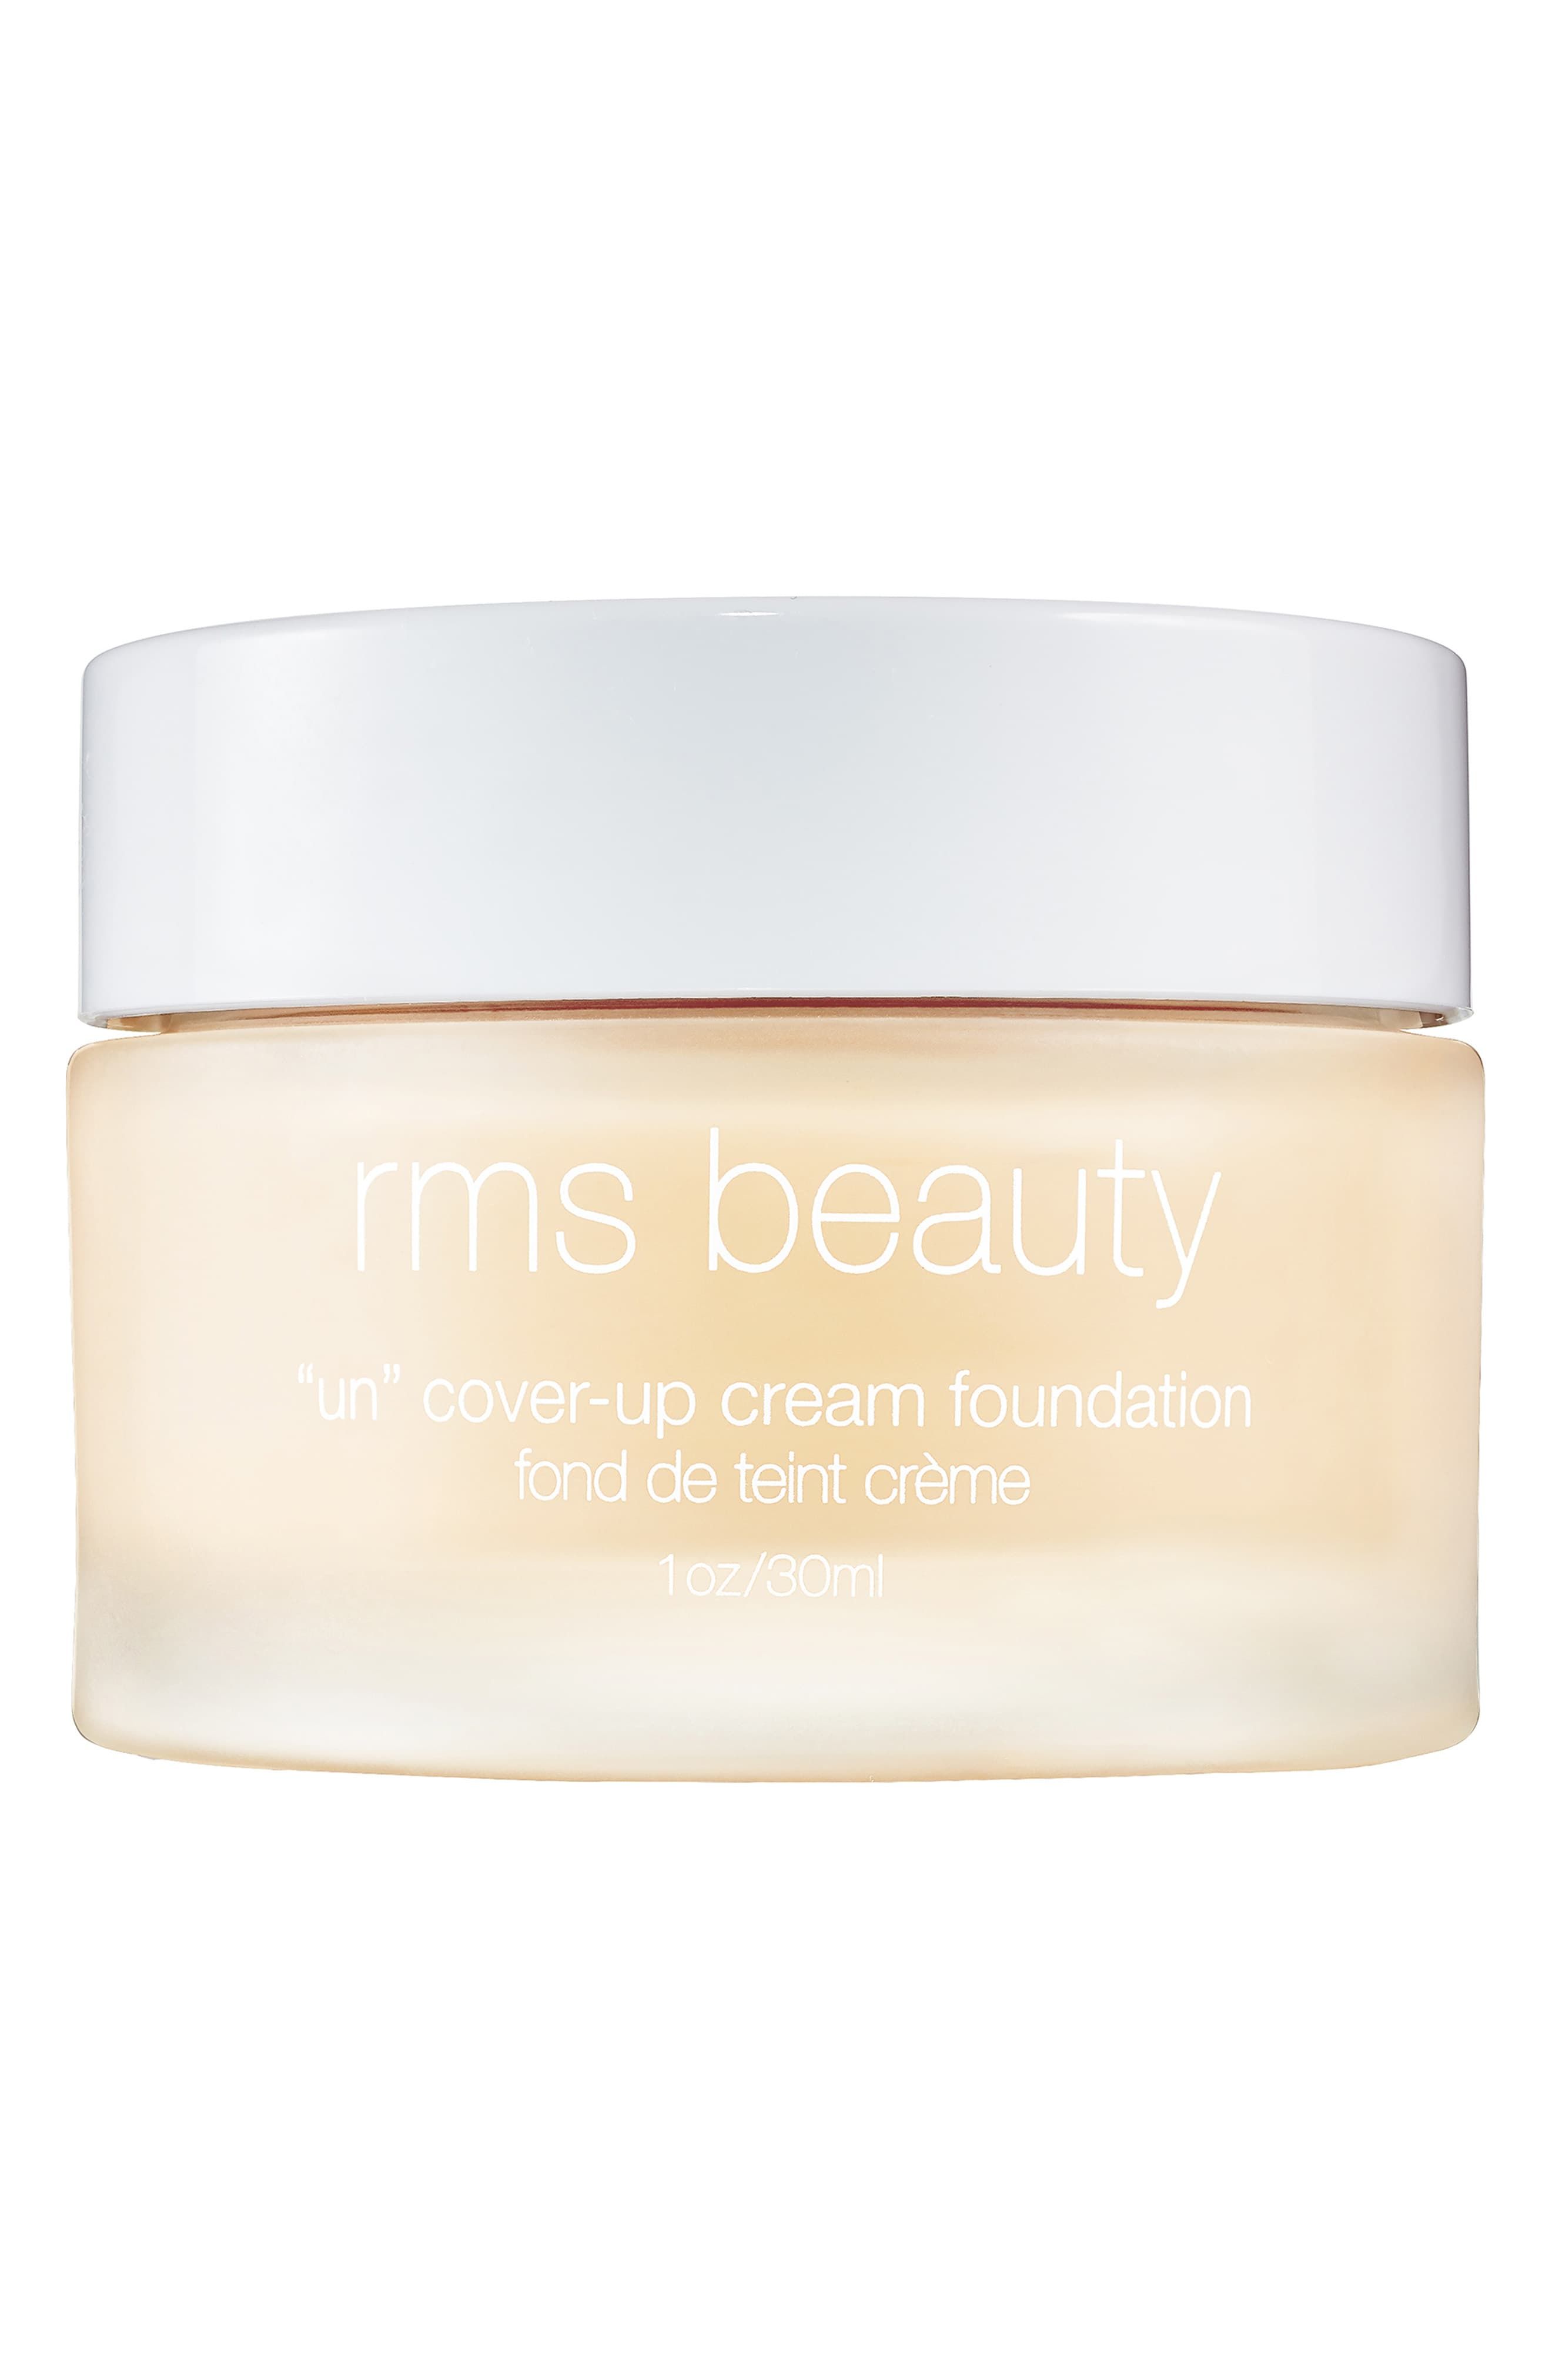 rms beauty "Un" Cover-Up Cream Foundation